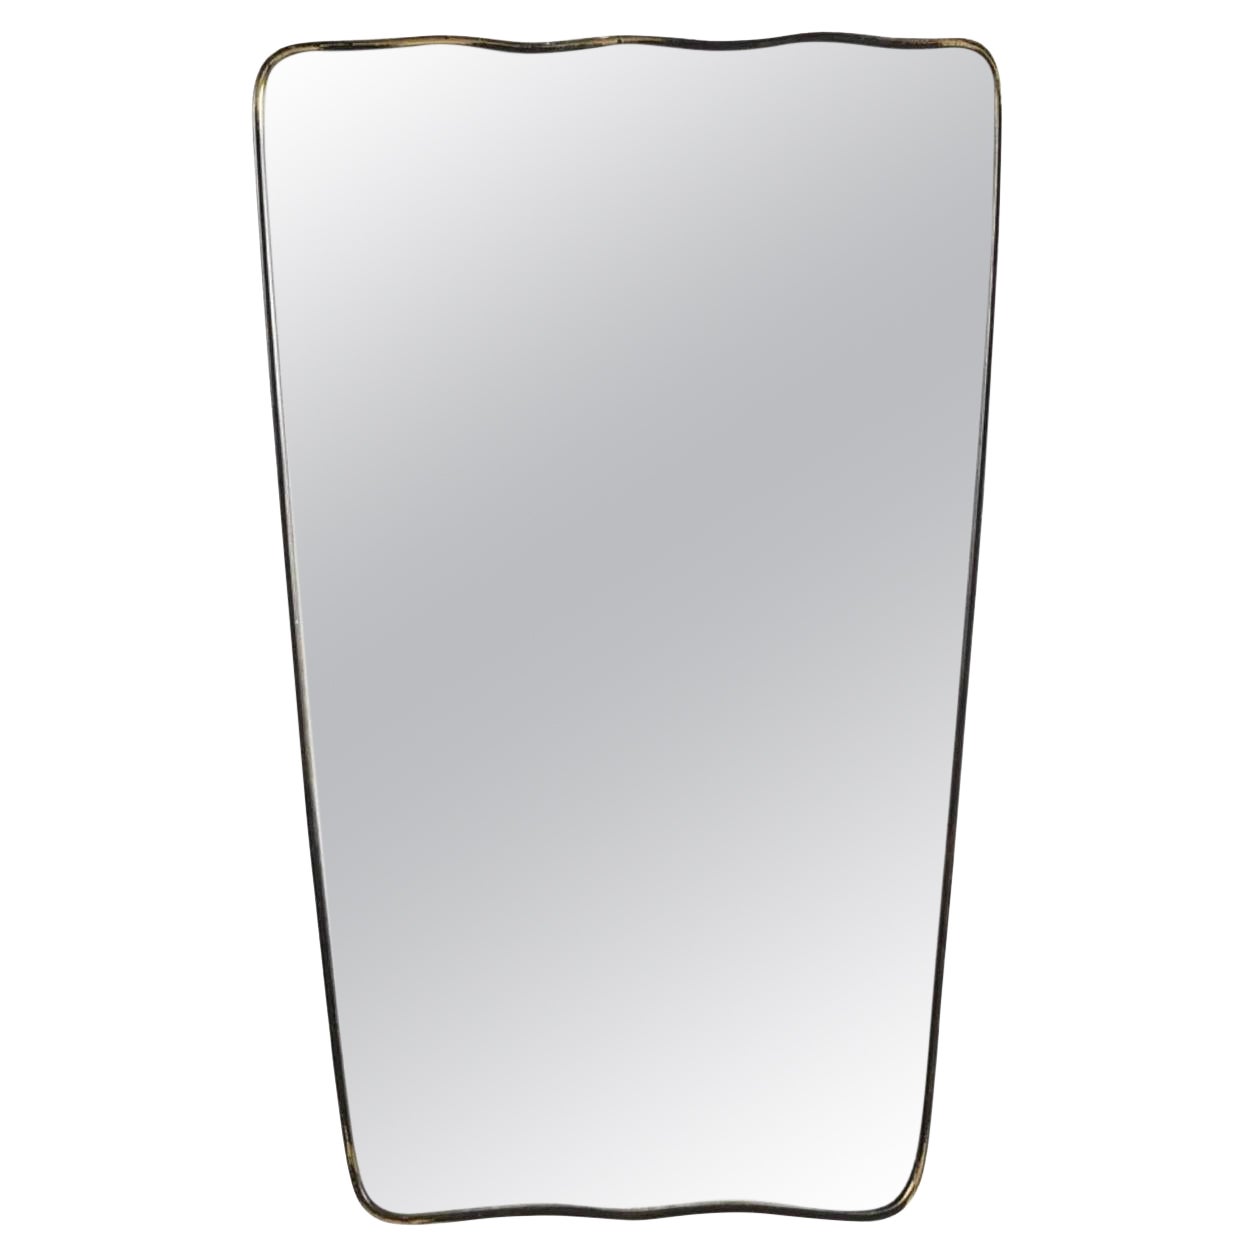 Italian wall mirror, produced in Italy, 1950s by Gio Ponti. Organically cut mirror glass in framed brass and shows patina. 

Other designers of the period include Fontana Arte, Max Ingrand, Franco Albini, and Josef Frank.